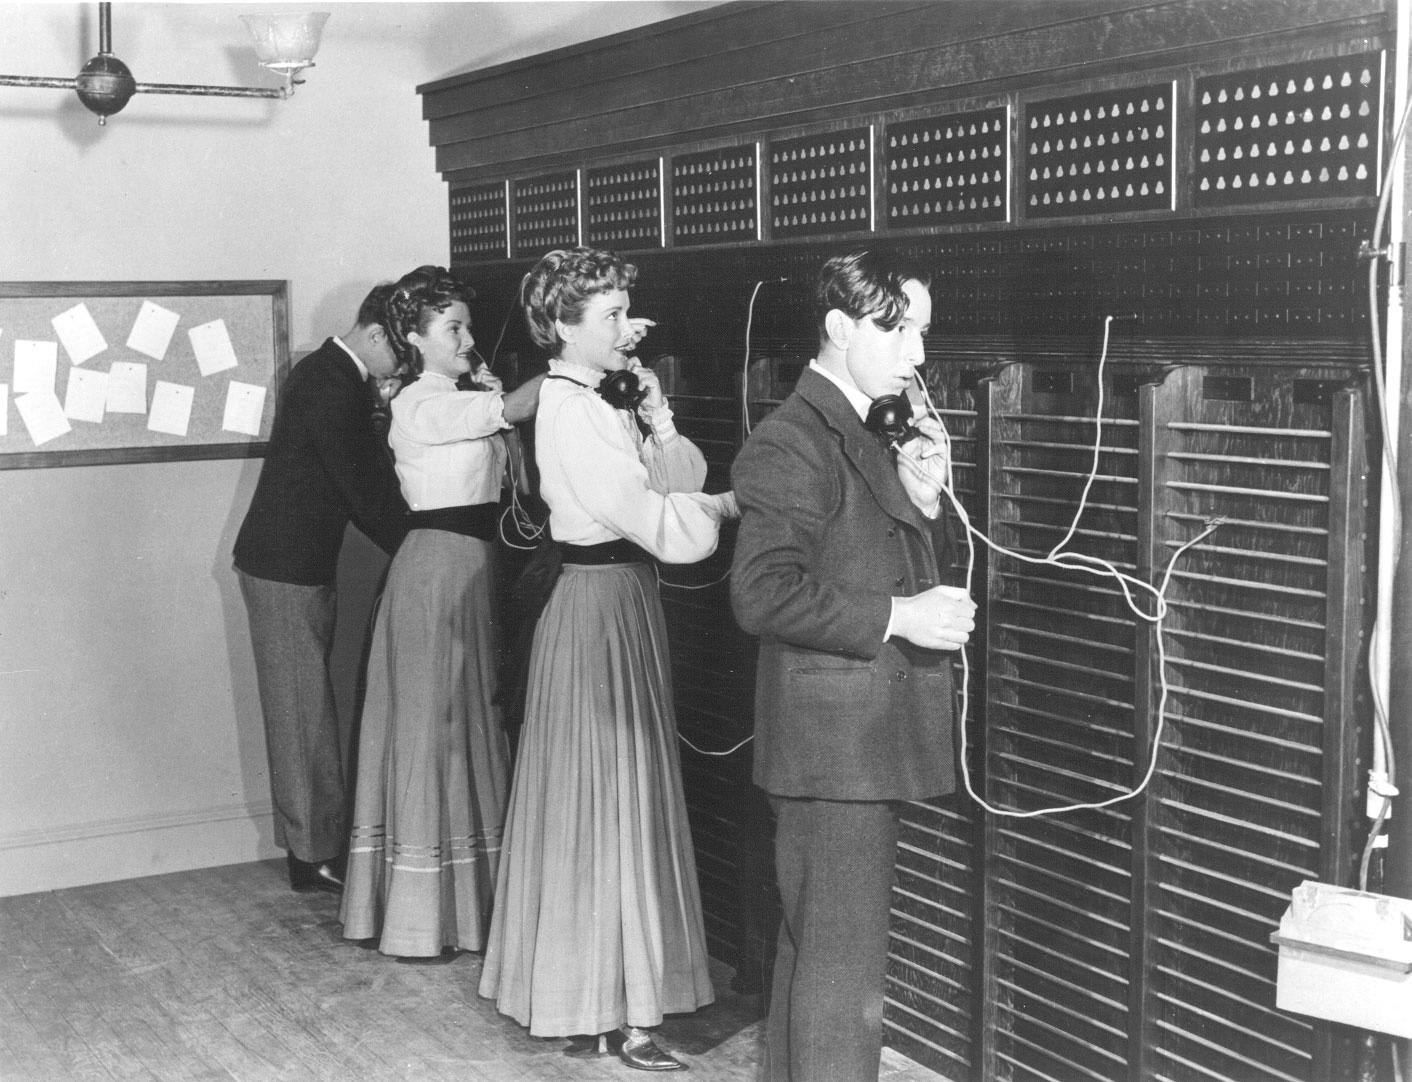 Emma Nutt becomes the world's first female telephone operator when she is recruited by Alexander Graham Bell to the Boston Telephone Dispatch Company